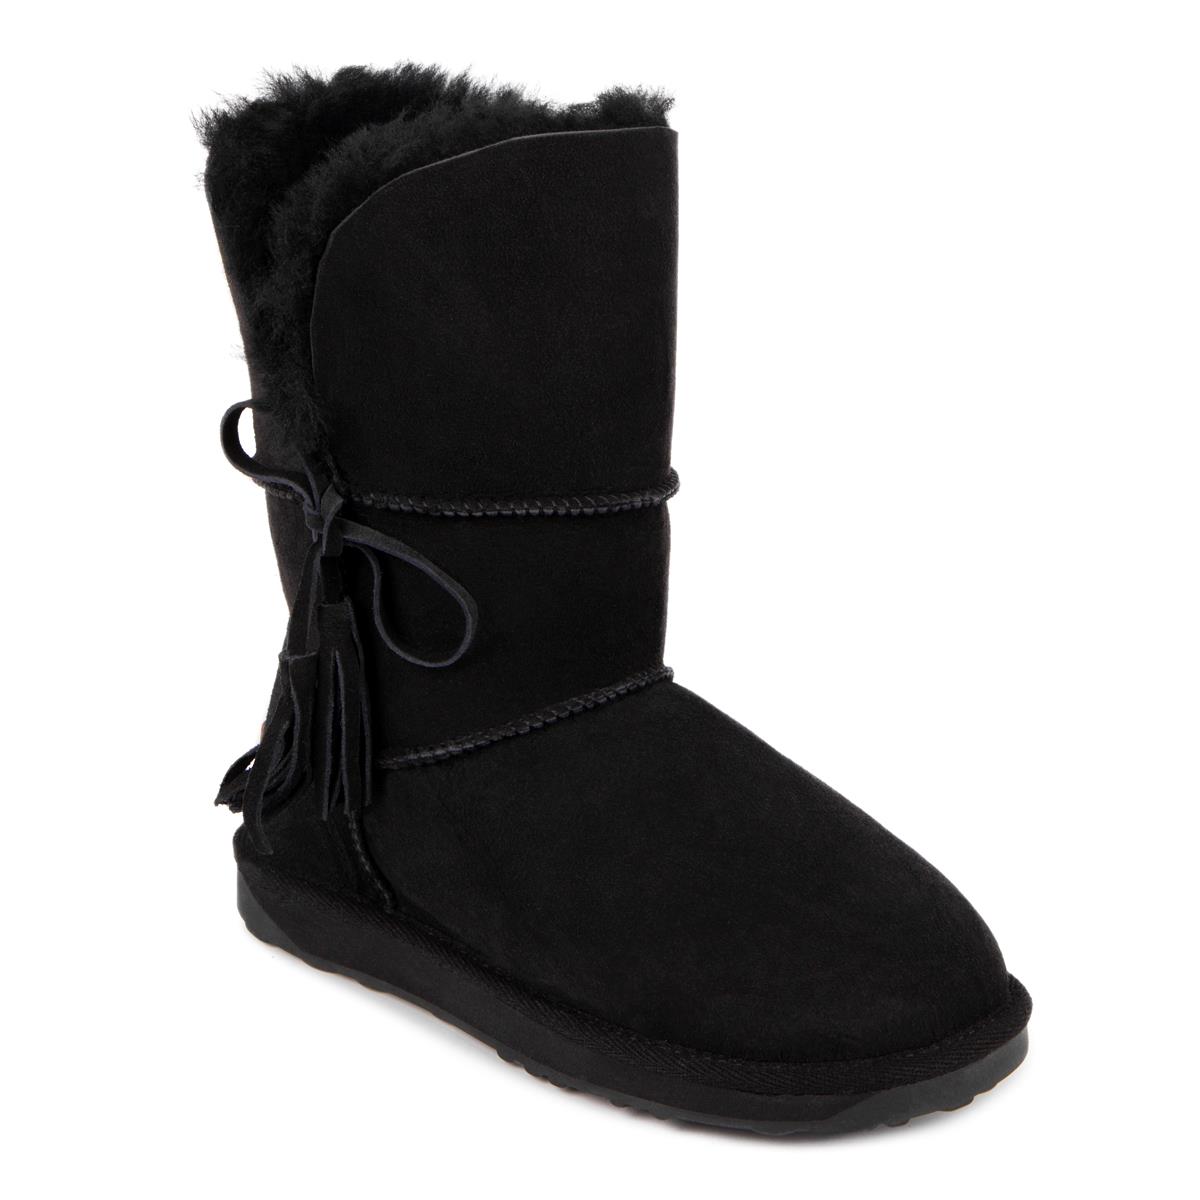 Ladies Cheshire Sheepskin Boots | Just Sheepskin Slippers and Boots